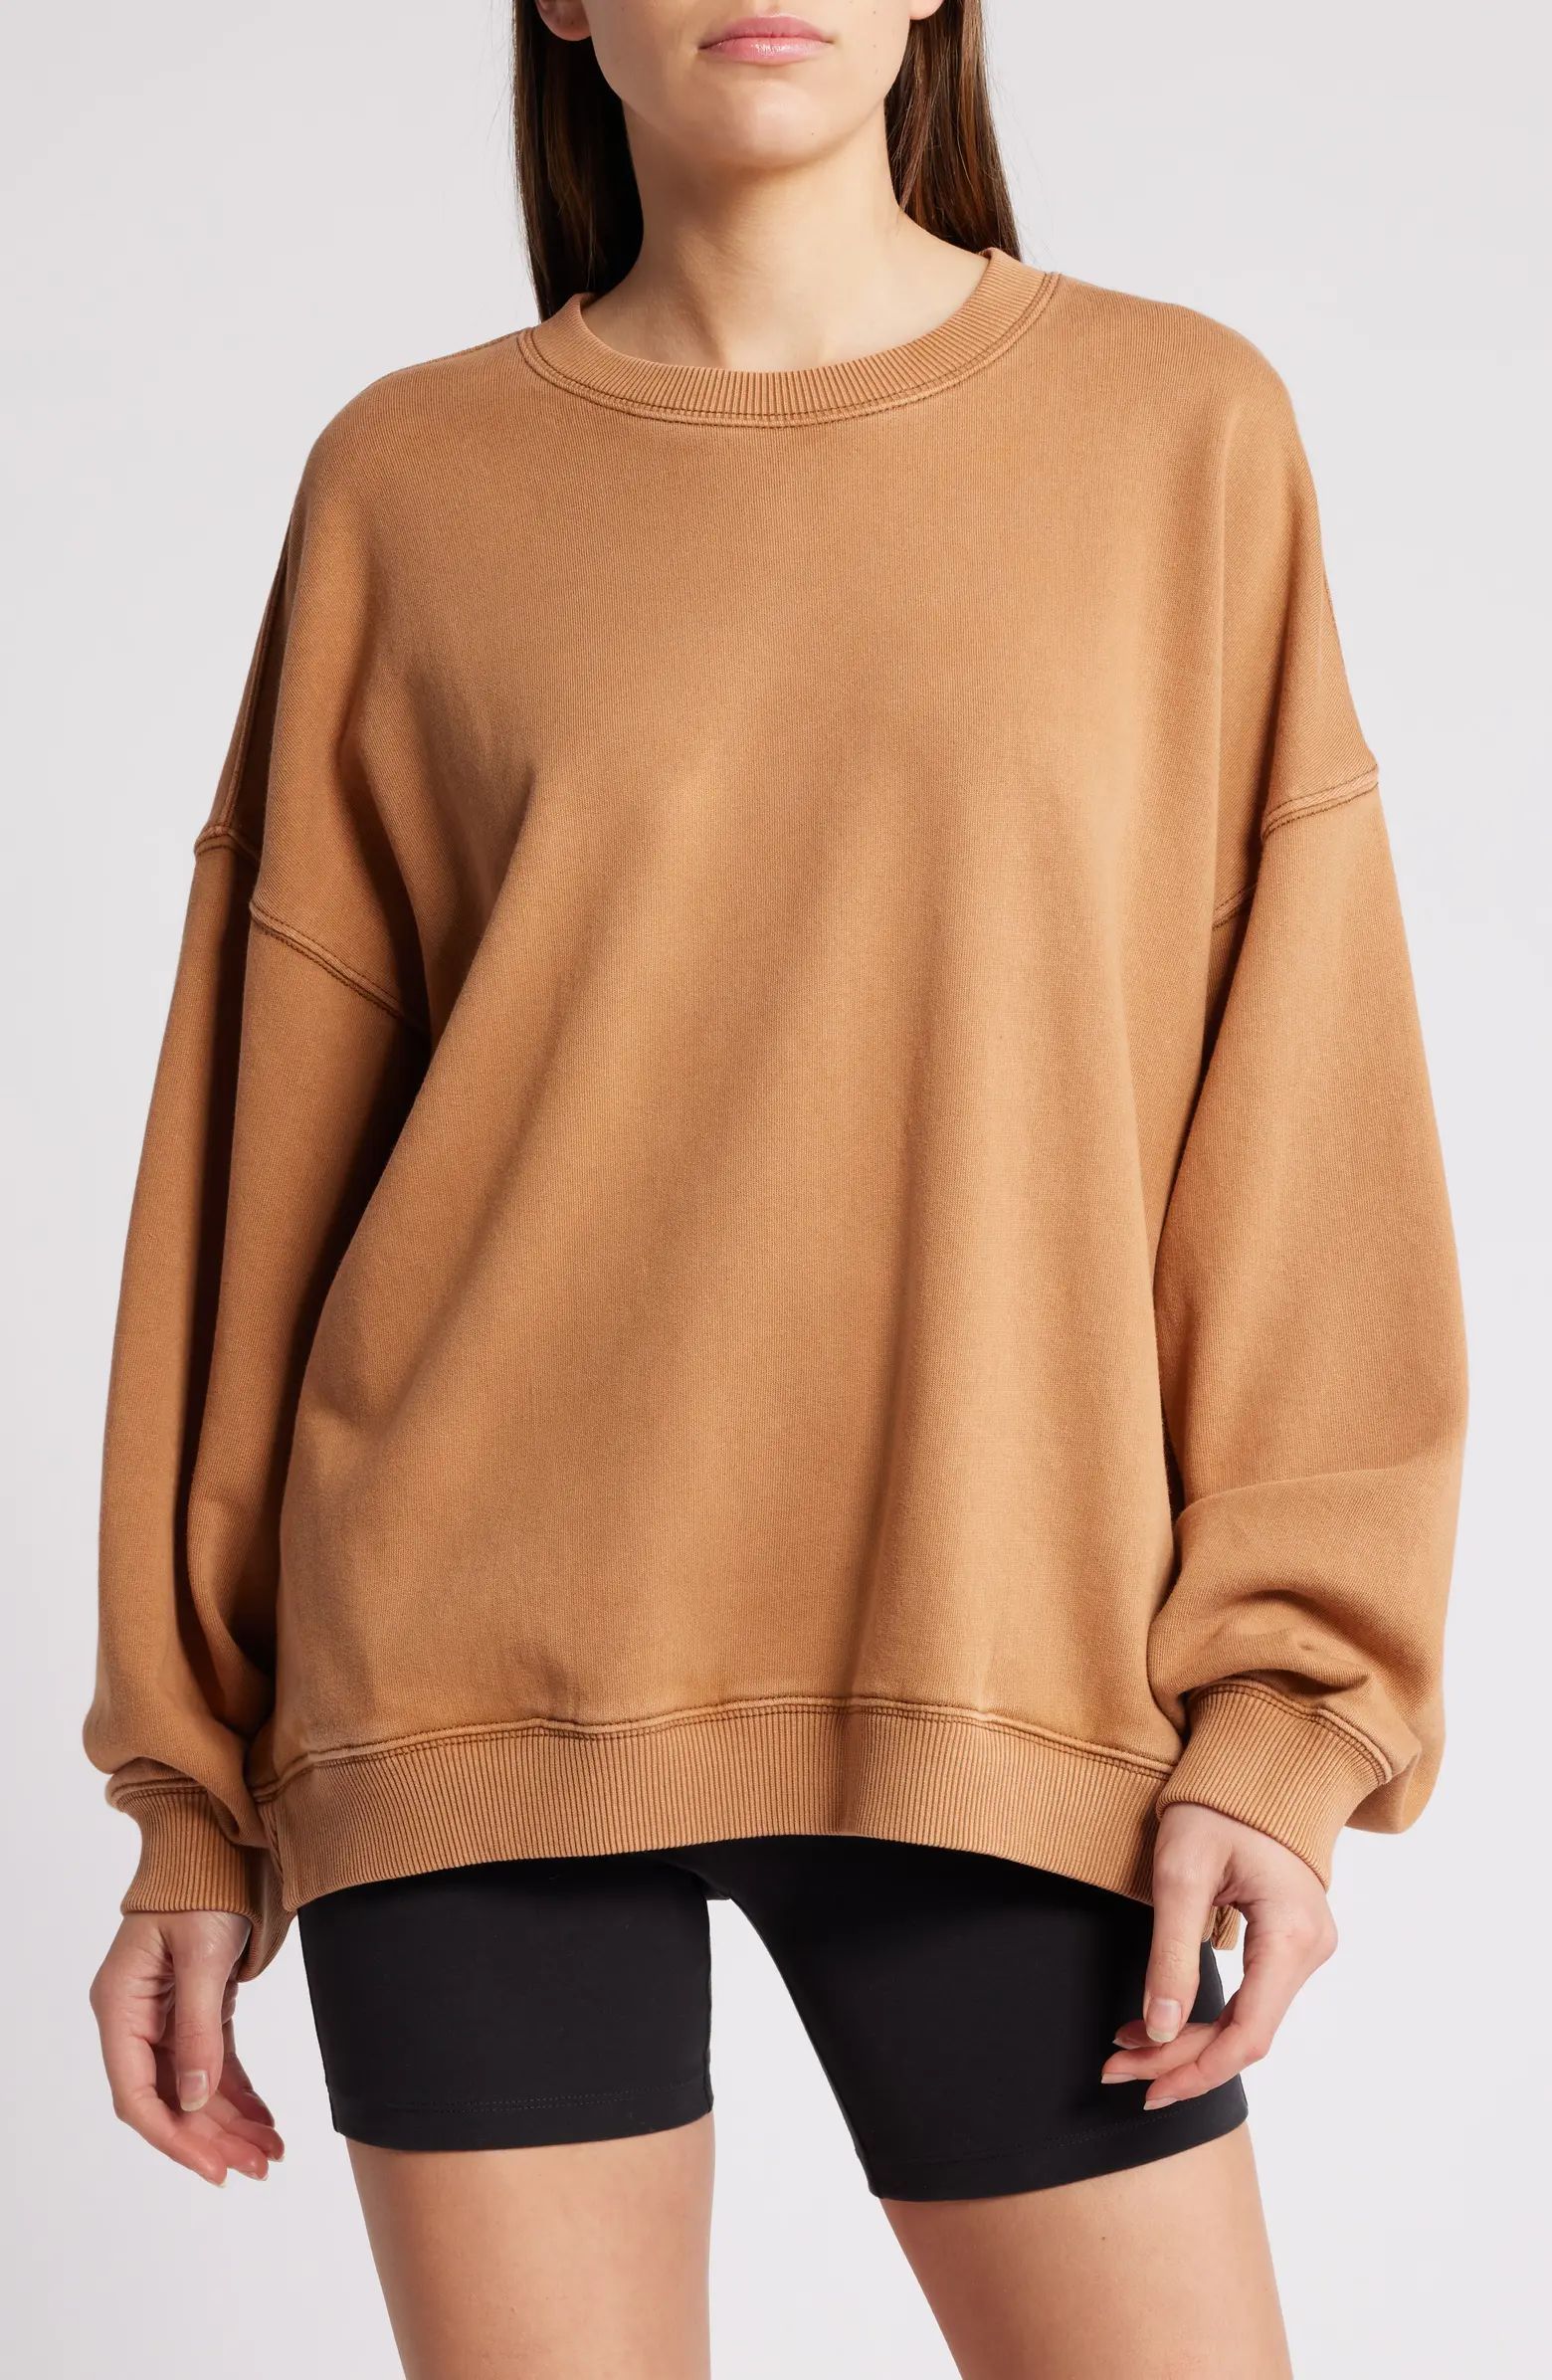 FP Movement by Free People All Star Sweatshirt | Nordstrom | Nordstrom